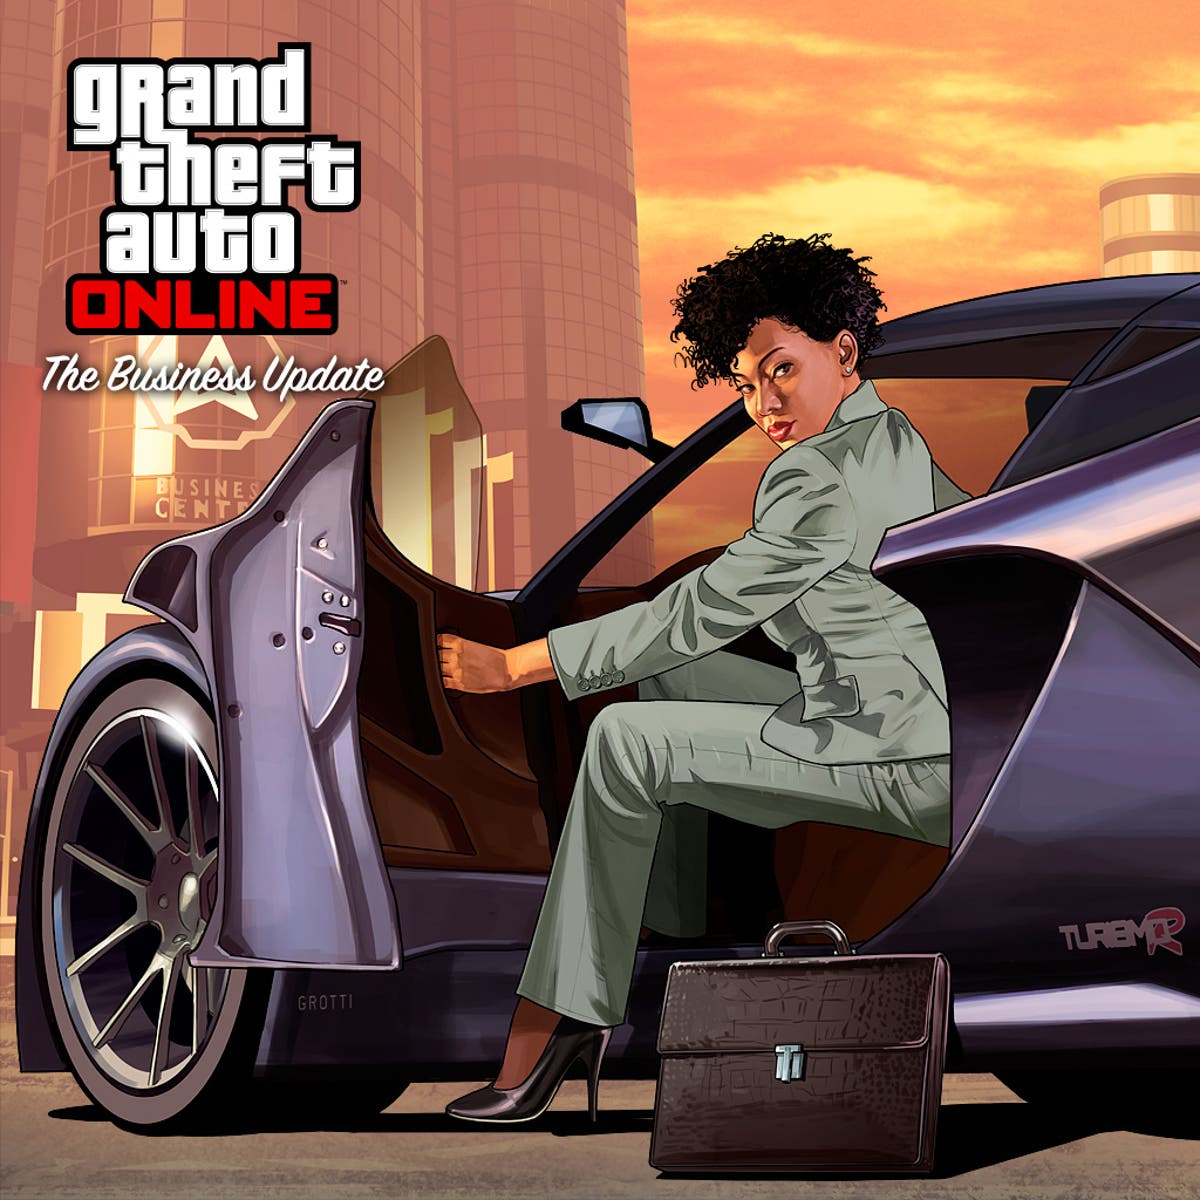 GTA 5 Online: 'Business' DLC update to bring new weapons, cars, planes